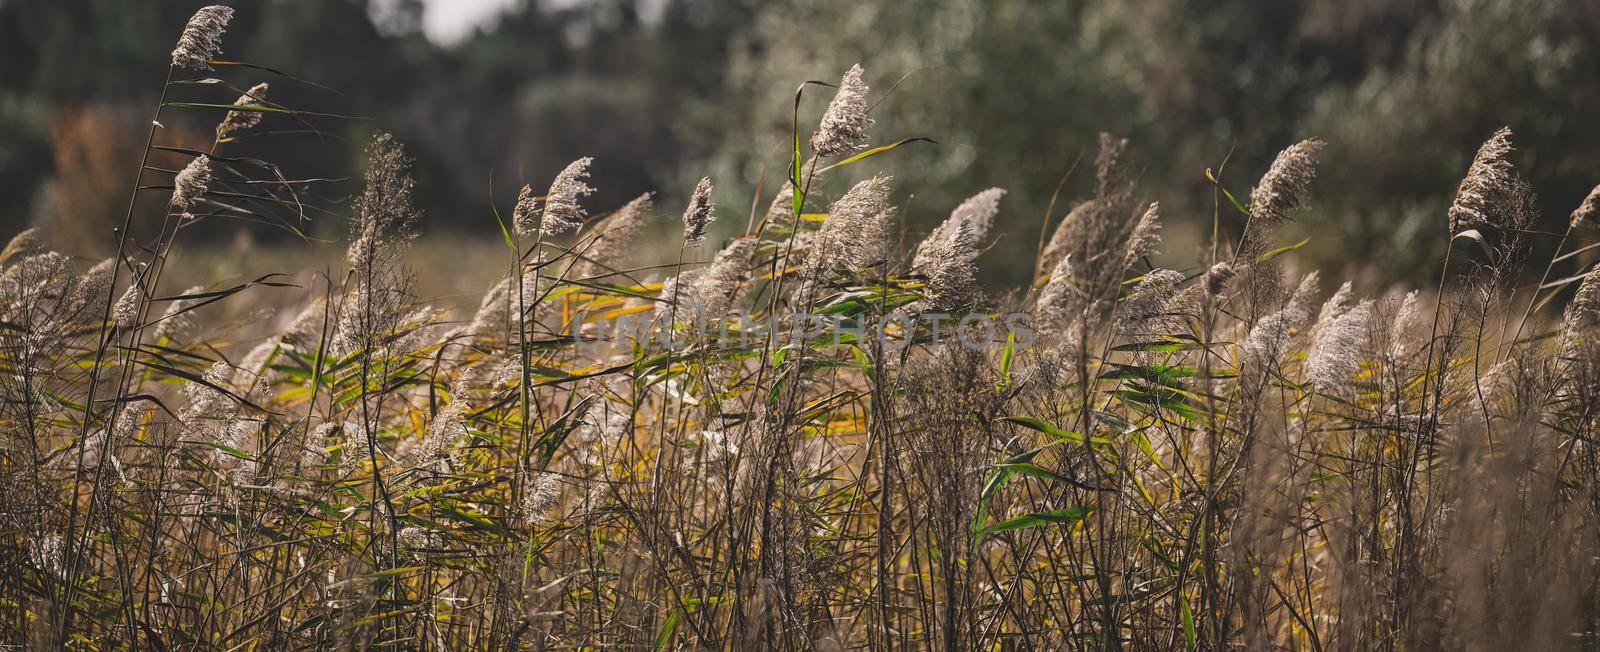 Dry stalks of reeds at the pond sway in the wind on an autumn day, Ukraine